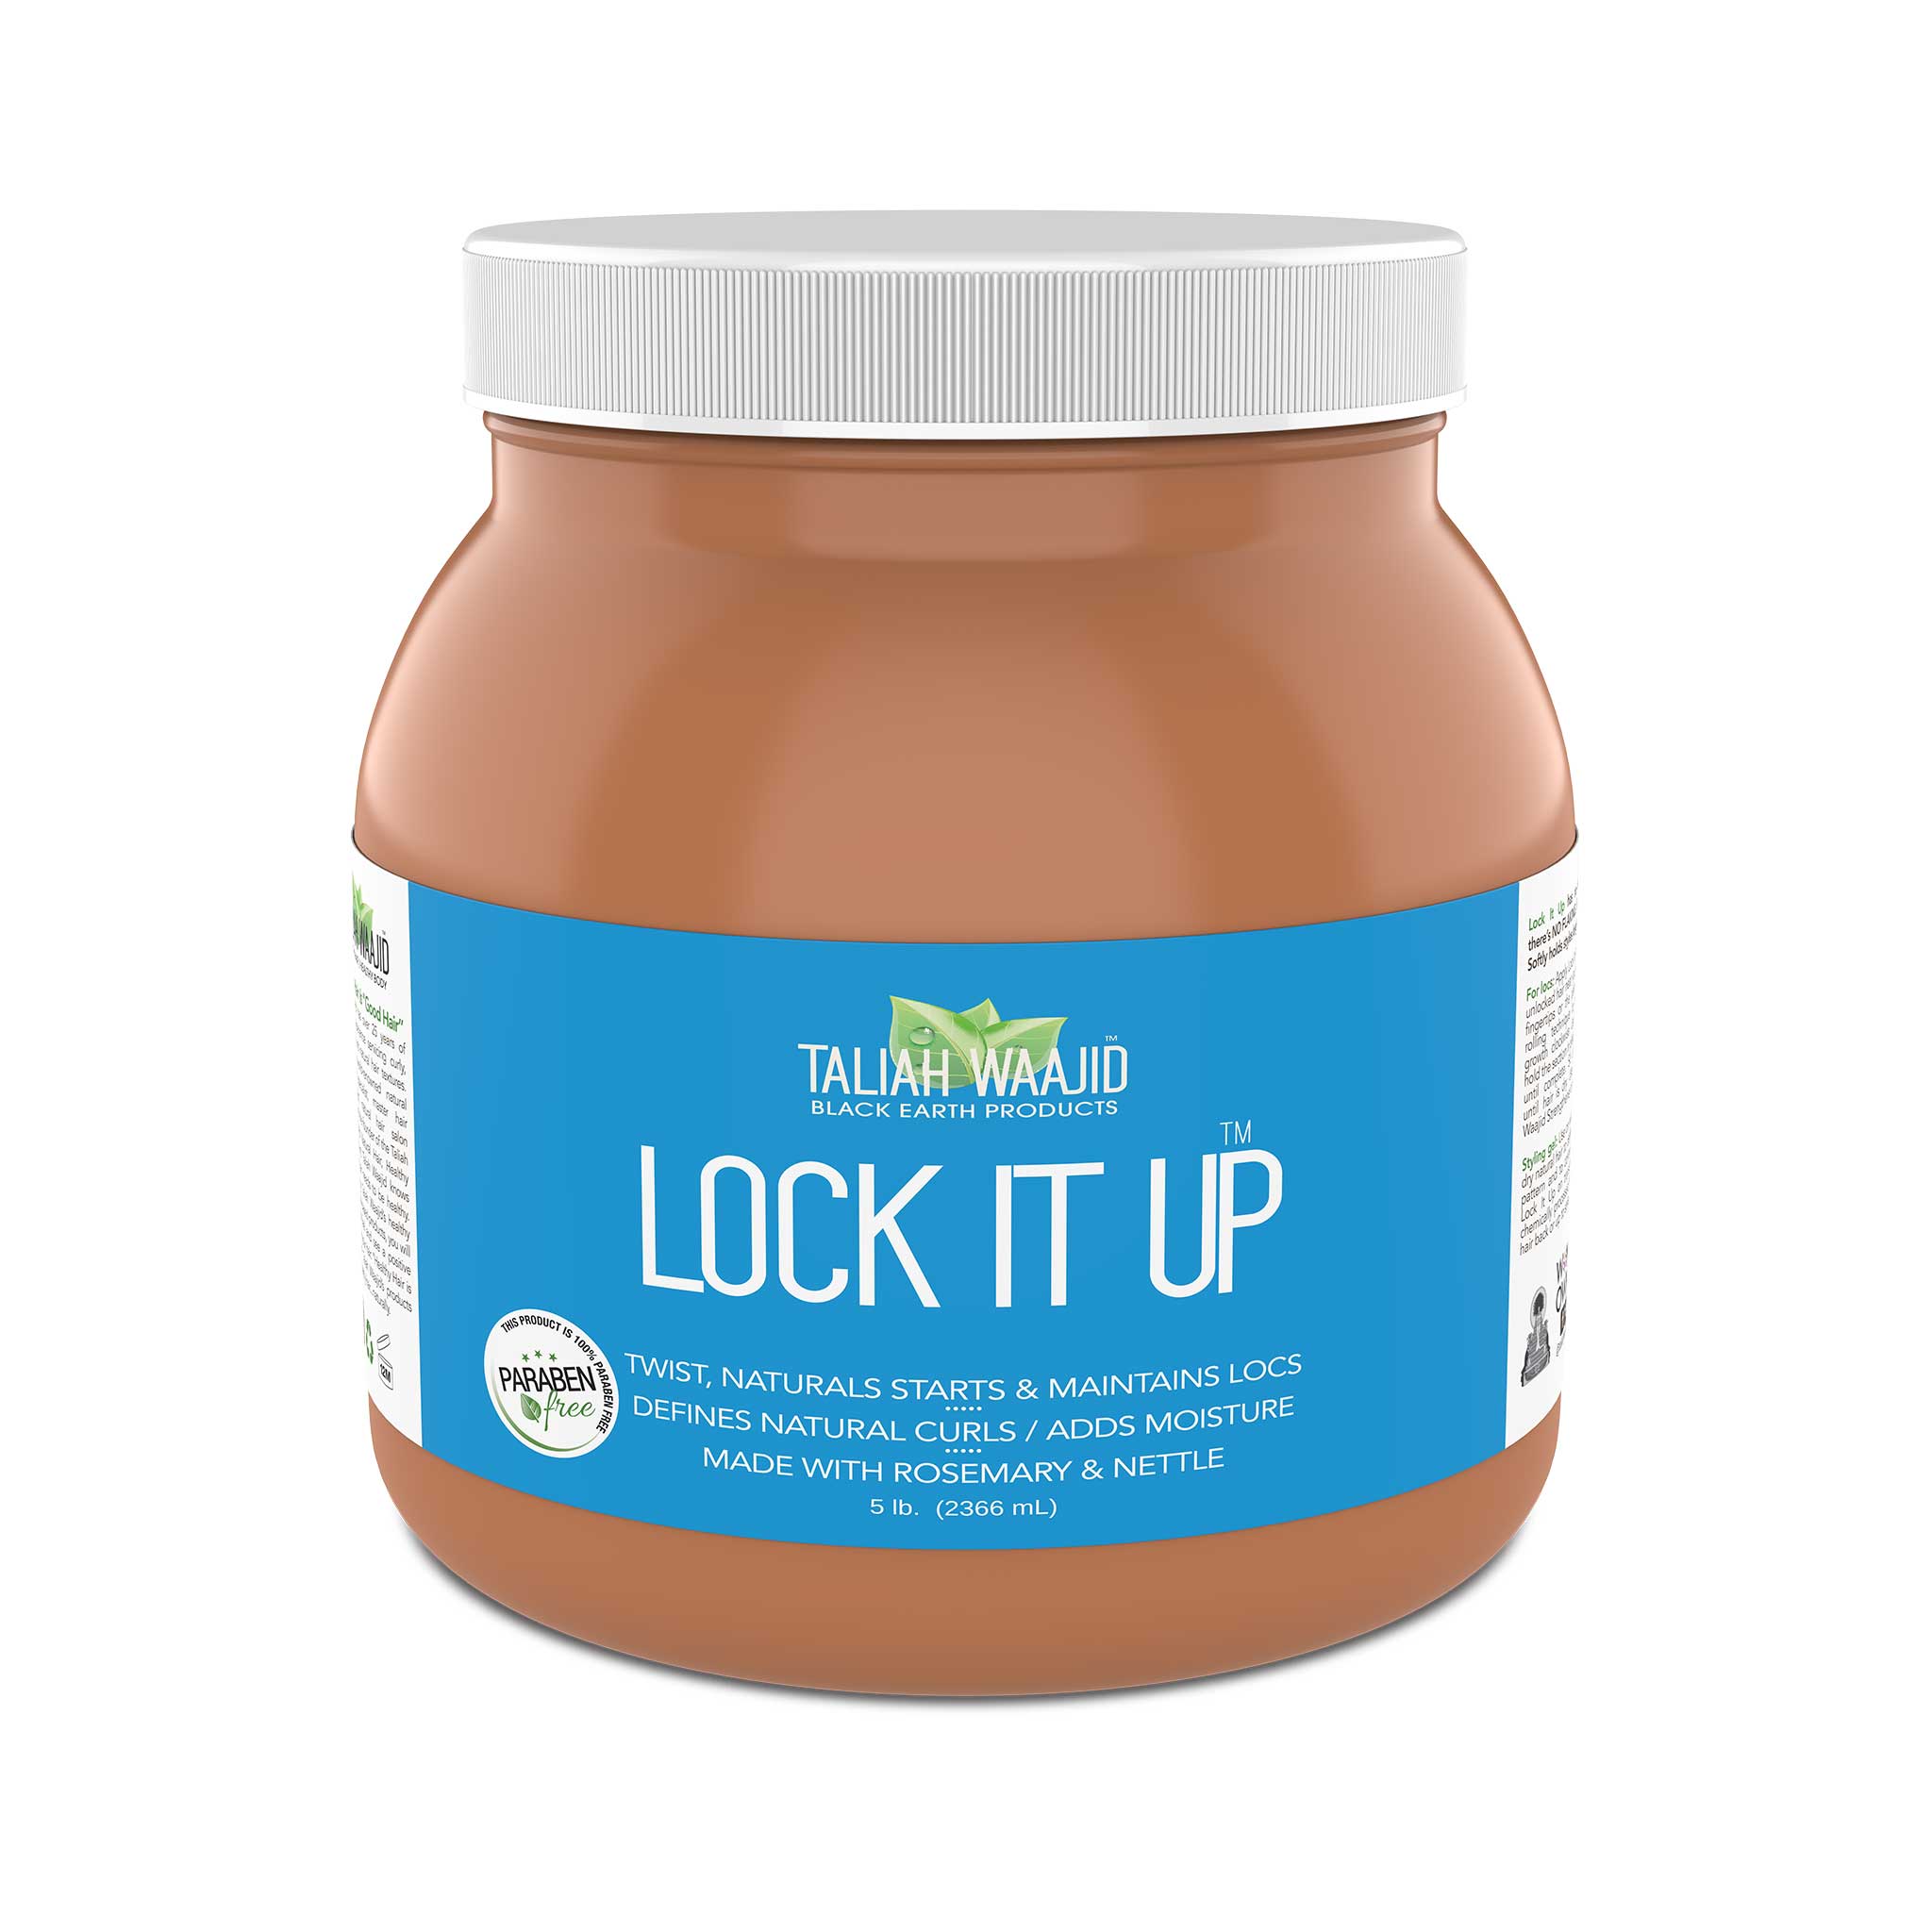 Black Earth Products Lock It Up - 5lb